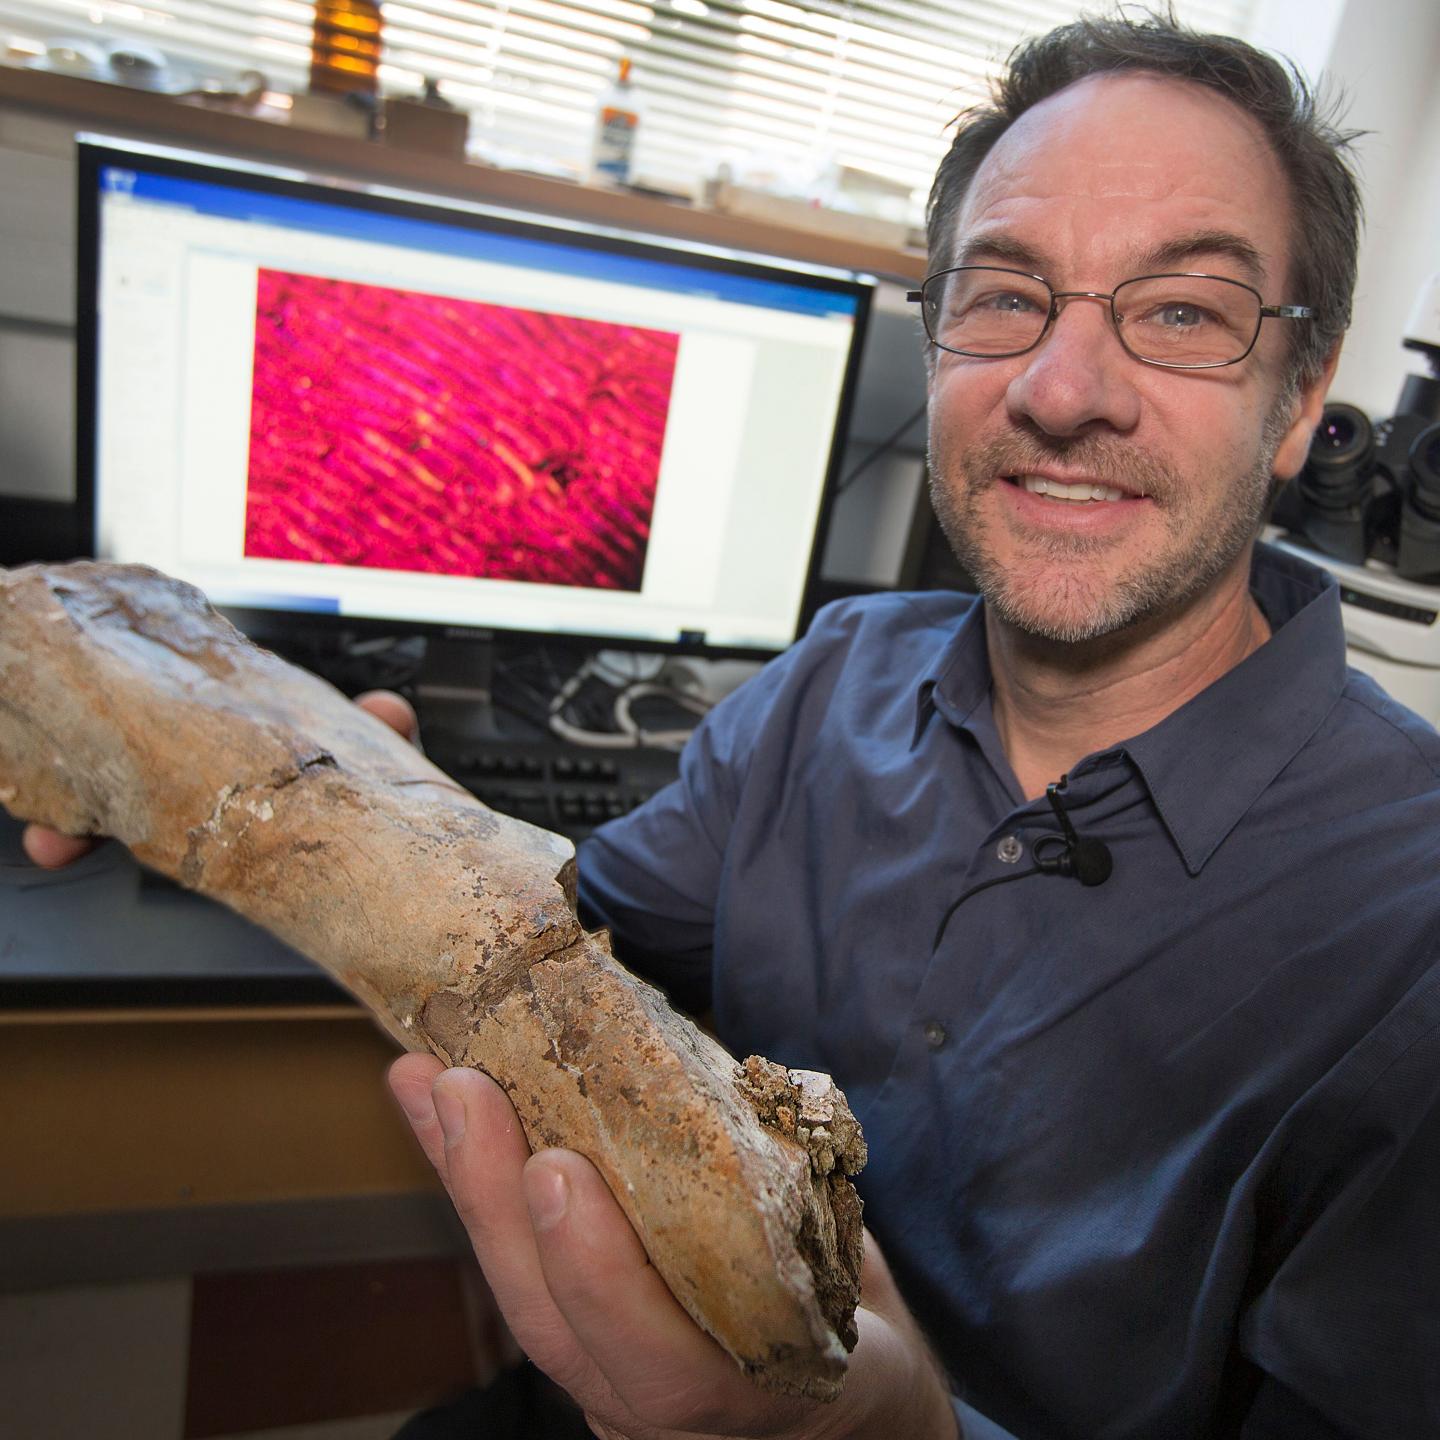 Gregory Erickson, a professor at the Florida State University, holds a leg bone from Eotrachadon in his lab in Tallahassee. Image credit: Bruce Palmer/Florida State University.